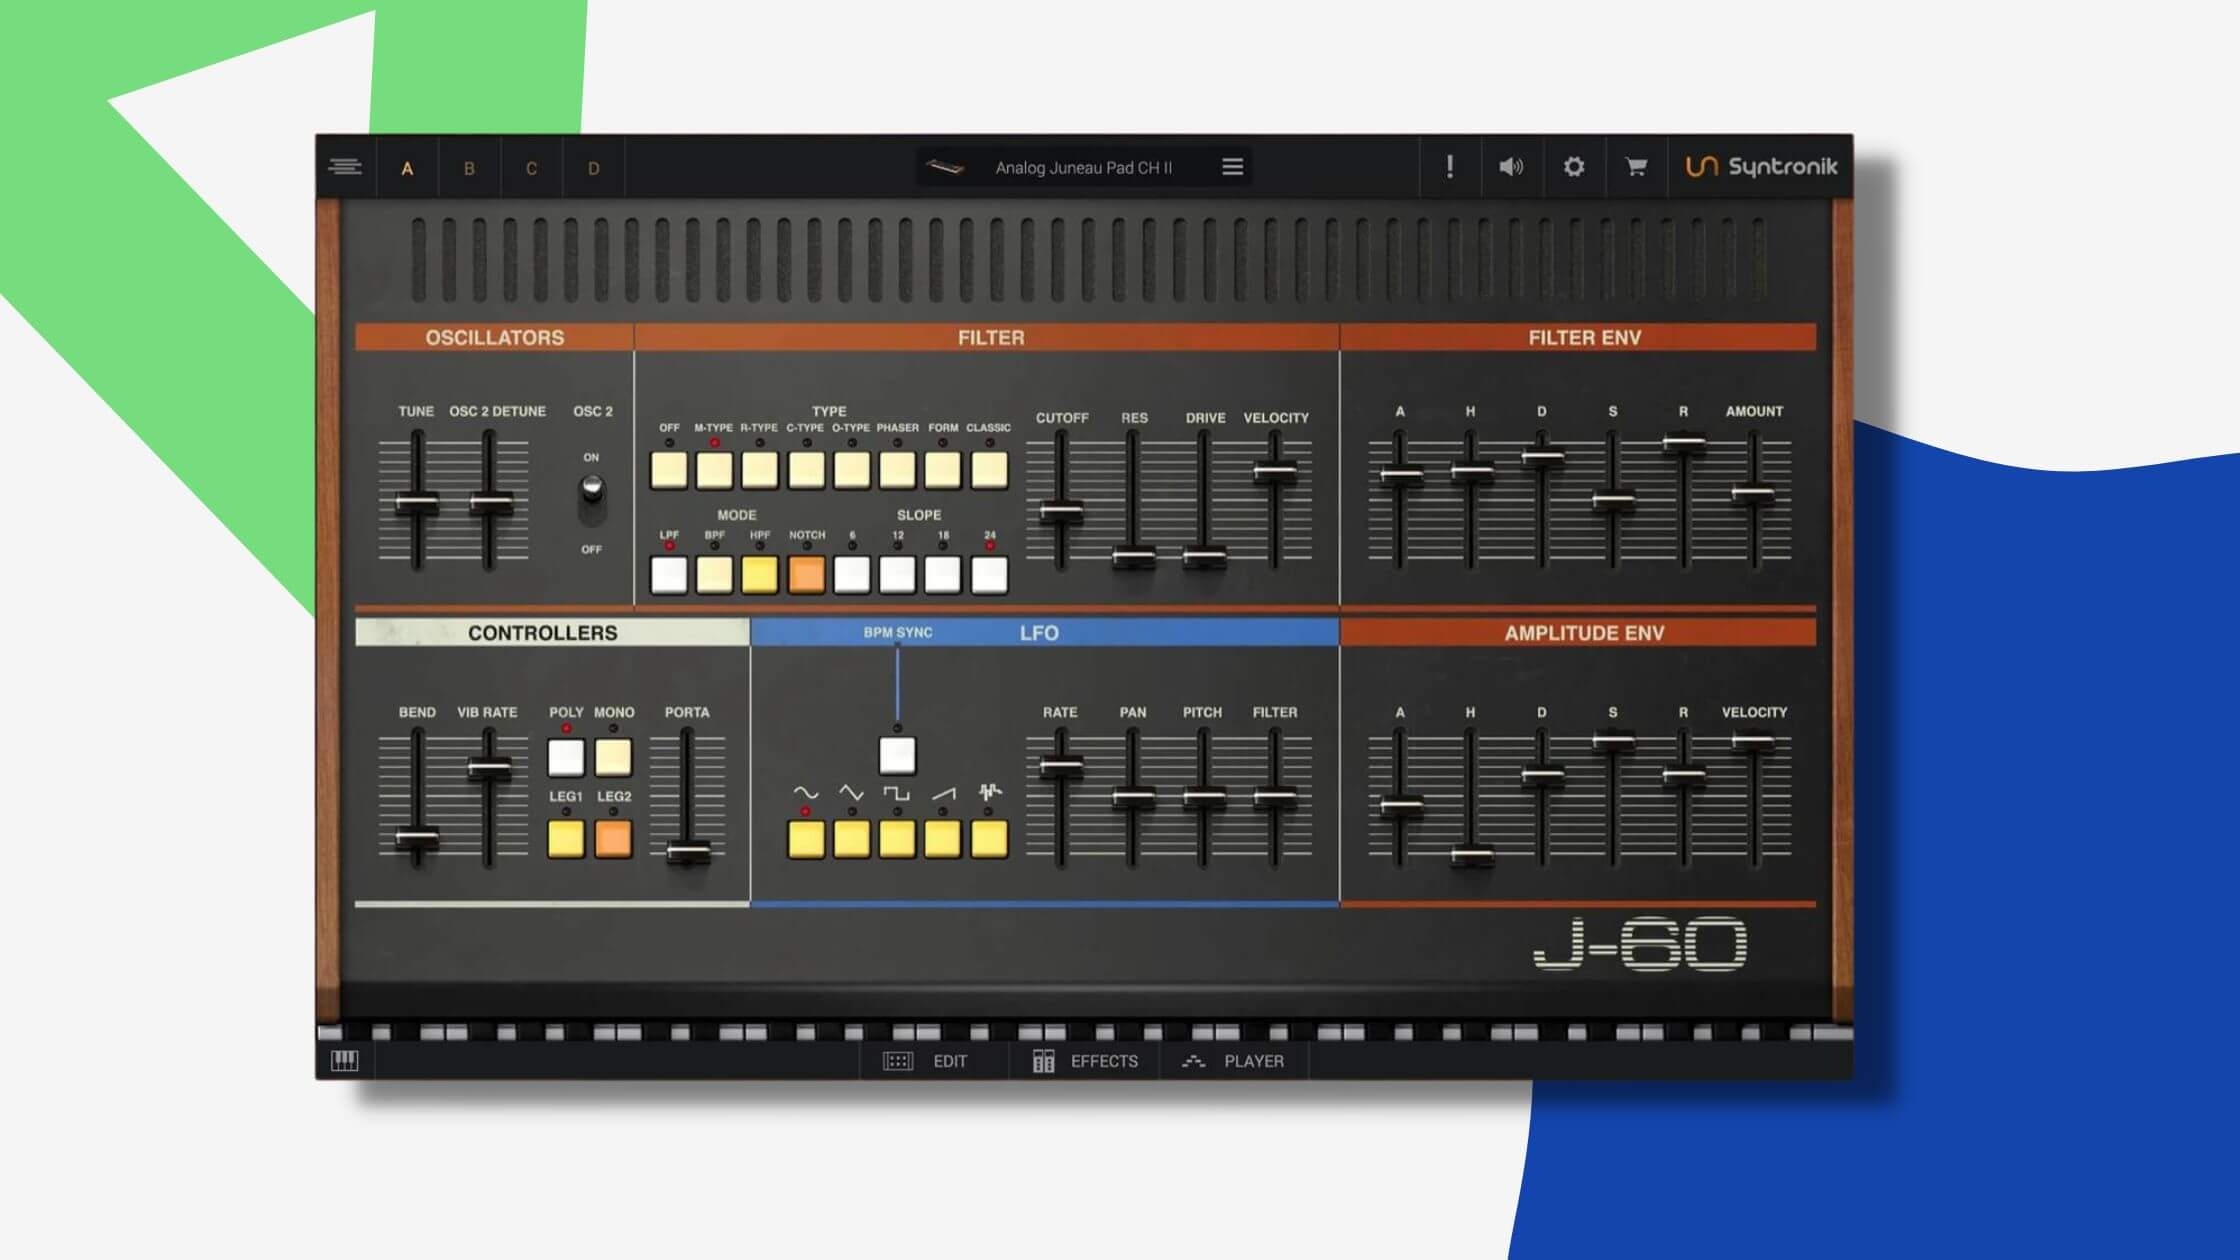 Get IK Multimedia’s Roland Juno-60 synth for free before time runs out